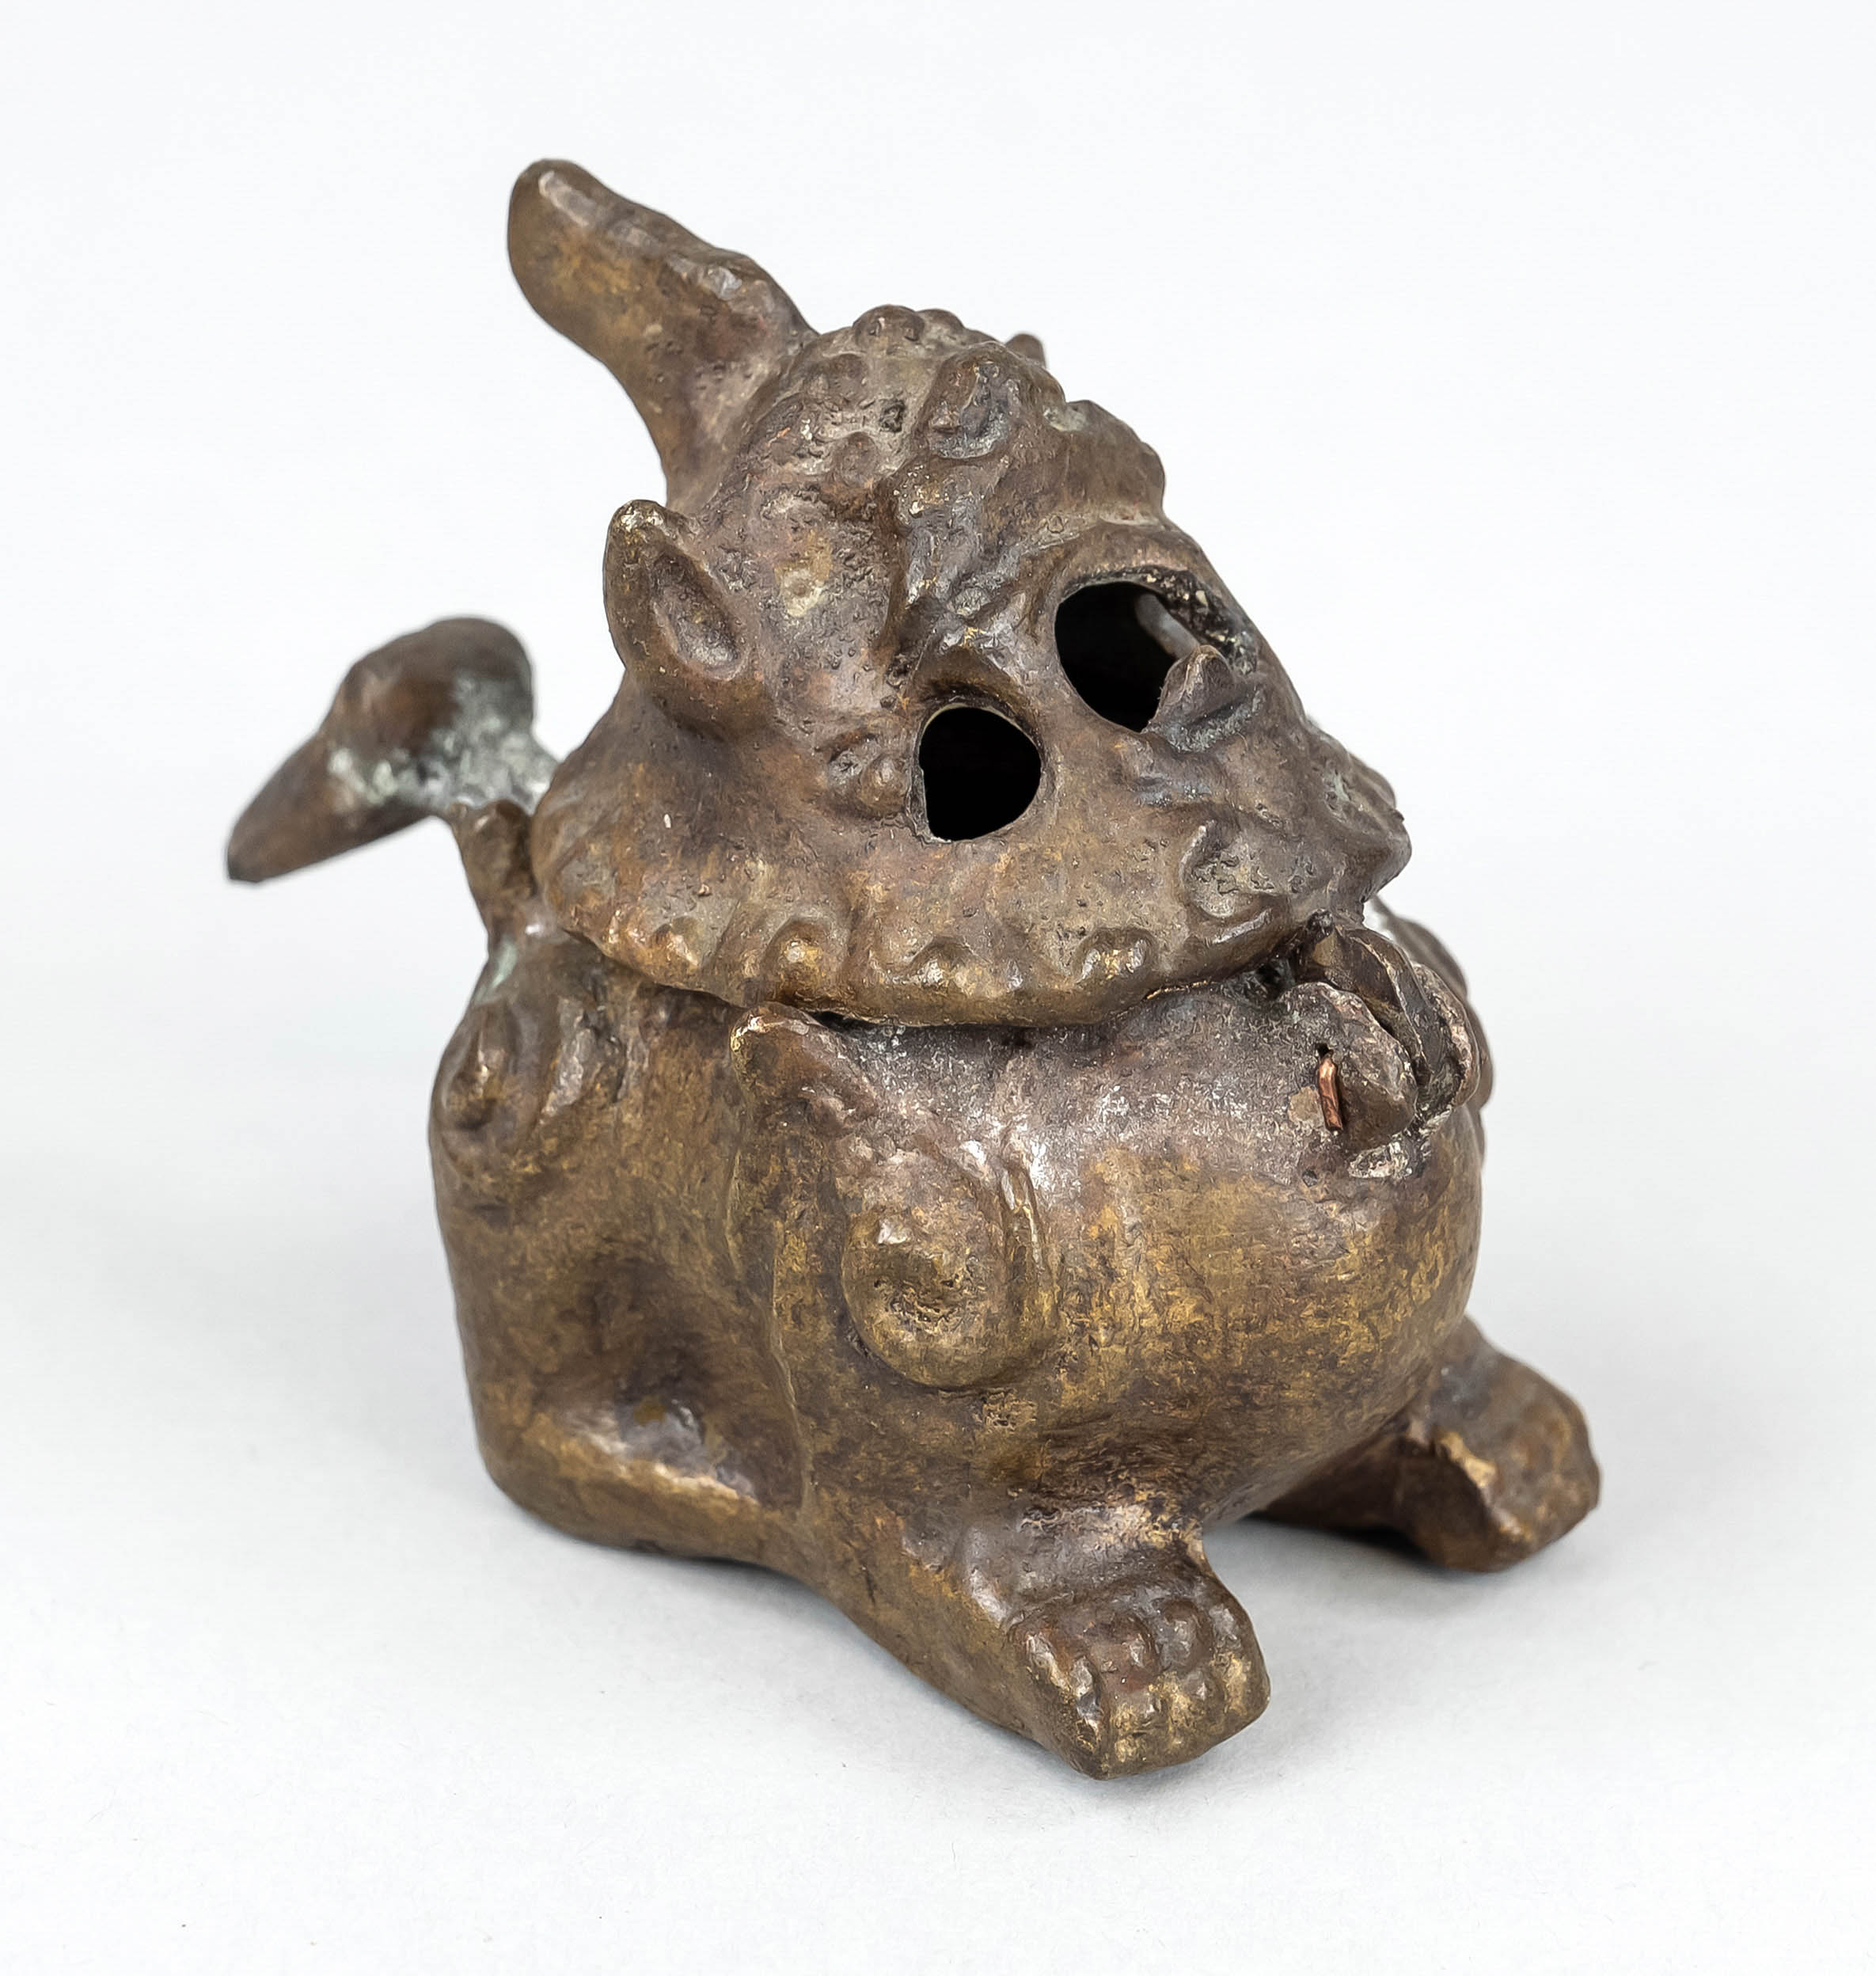 Incense burner in the style of the Ming dynasty(1368-1644), China, around 1900, incense burner in